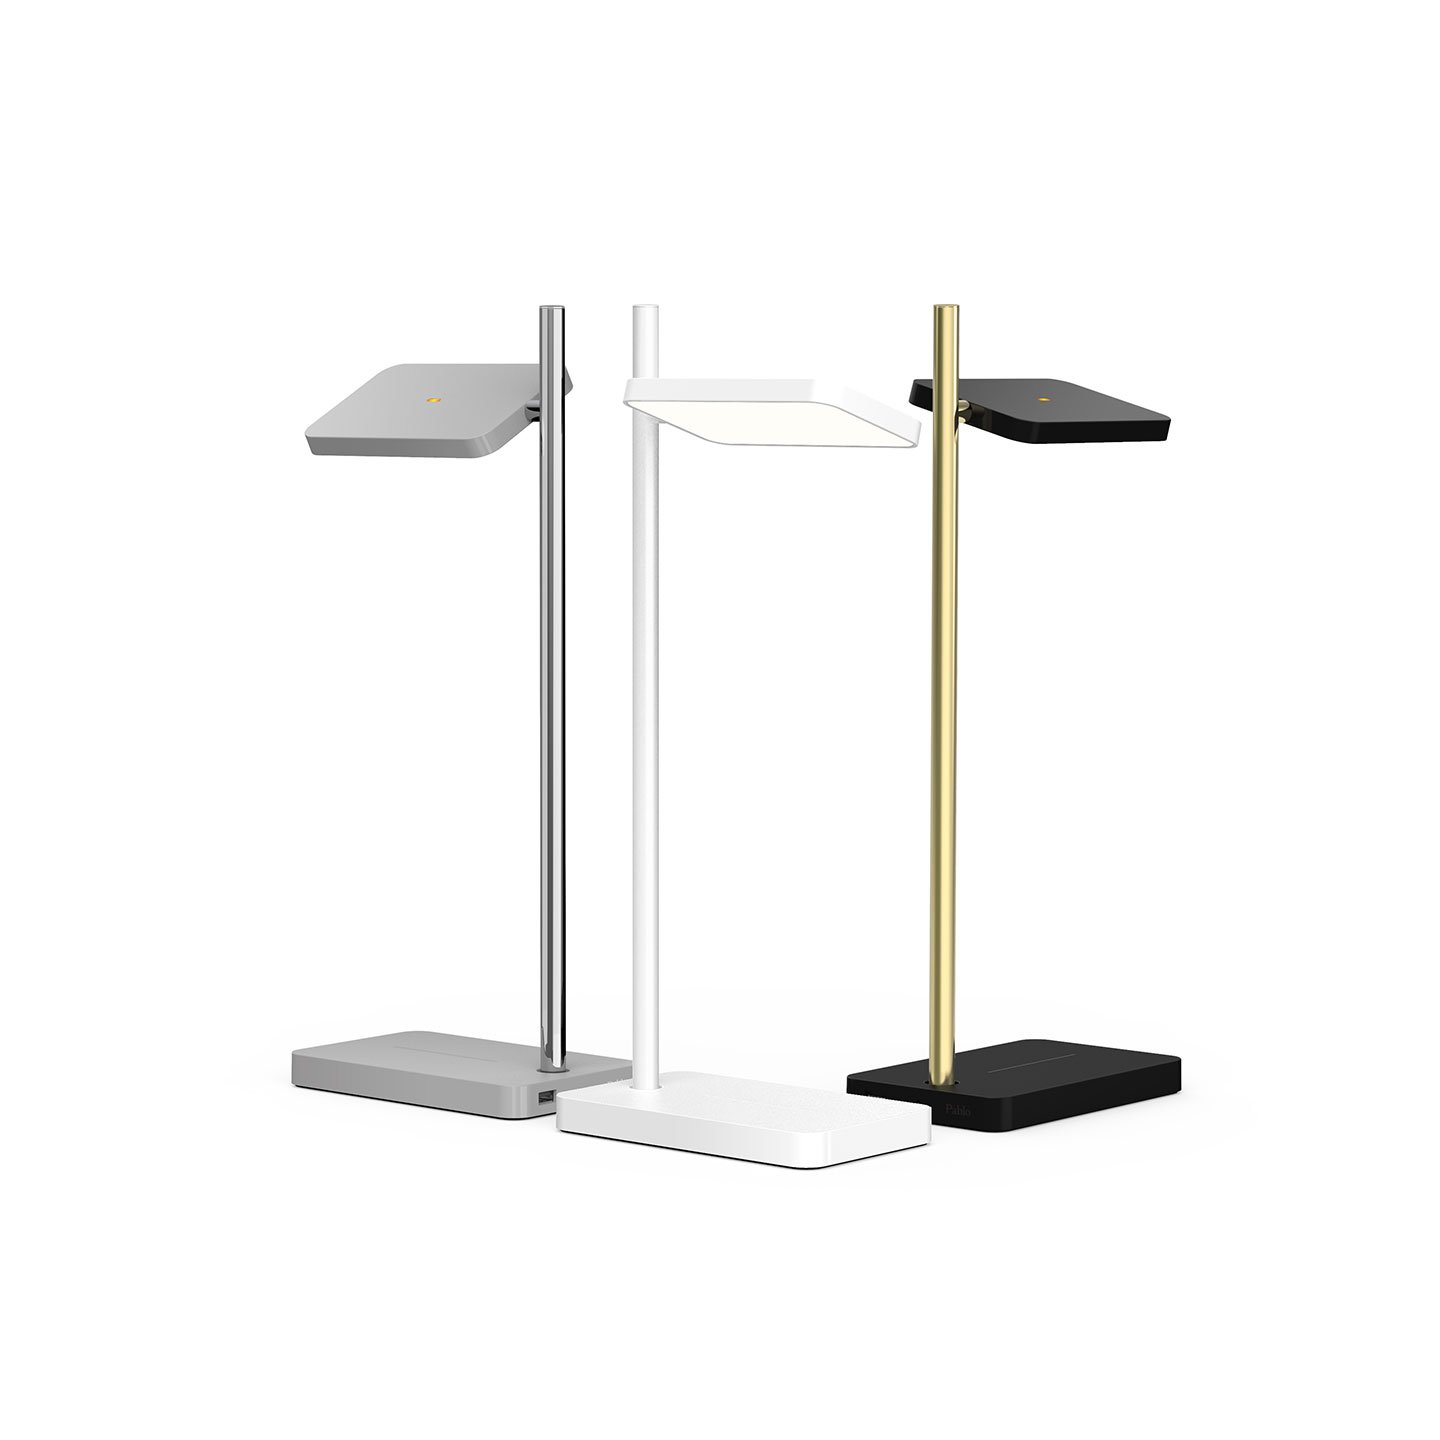 Haworth Talia Lighting by Pablo Designs in grey color, white color, and black color with gold pole